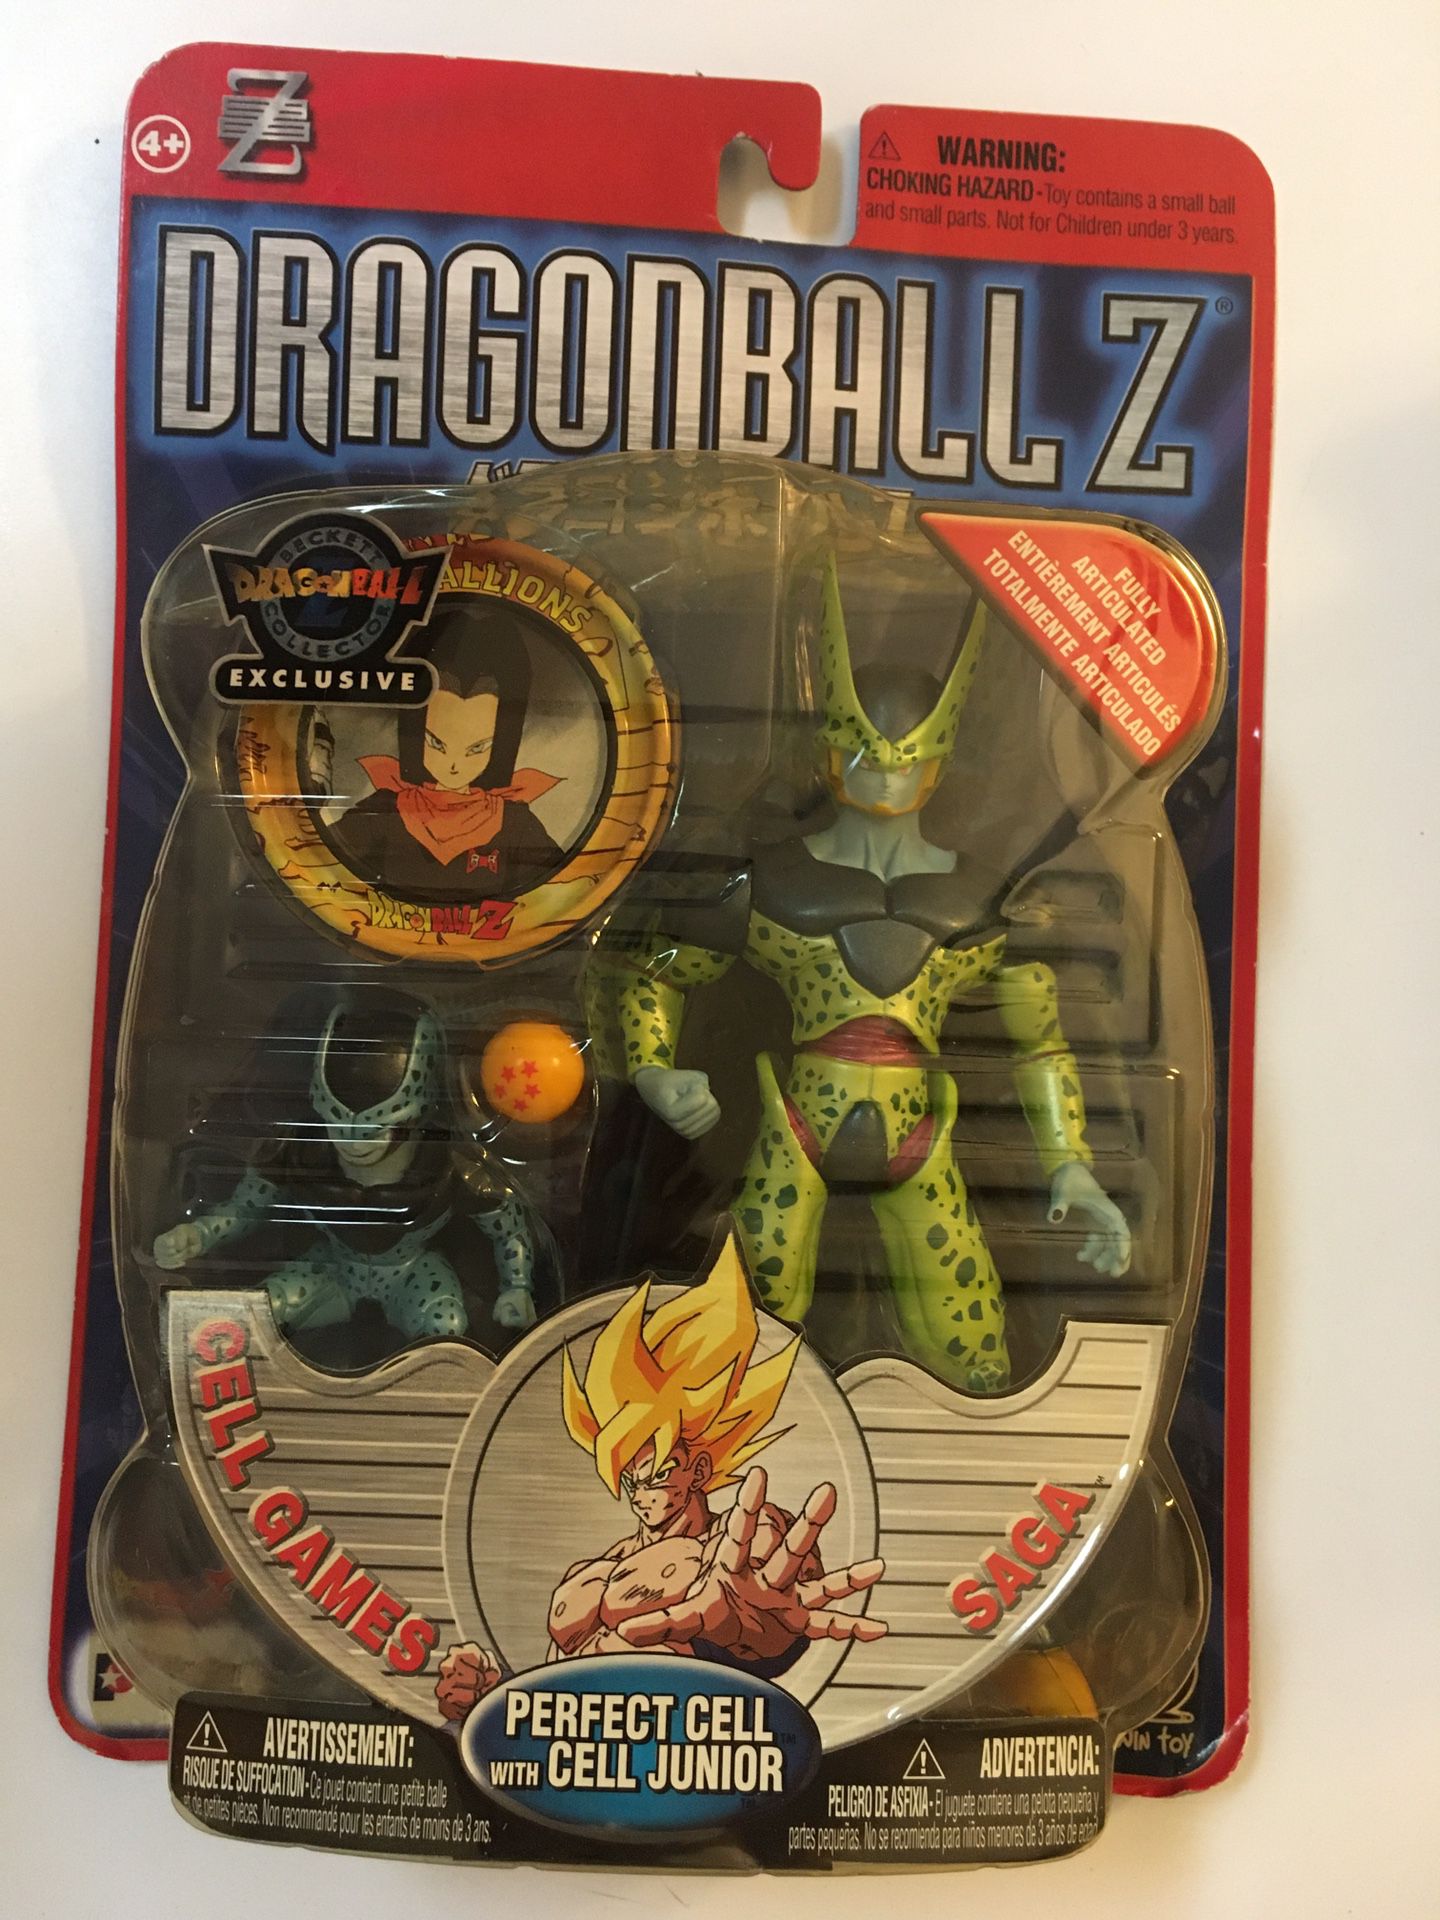 Dragonball Z Cell Games Saga PERFECT CELL WITH CELL JUNIOR Deluxe Action Figure 2000 Irwin Toy Series 5 Dragon Ball Z DBZ NEW IN PACKAGE!!!